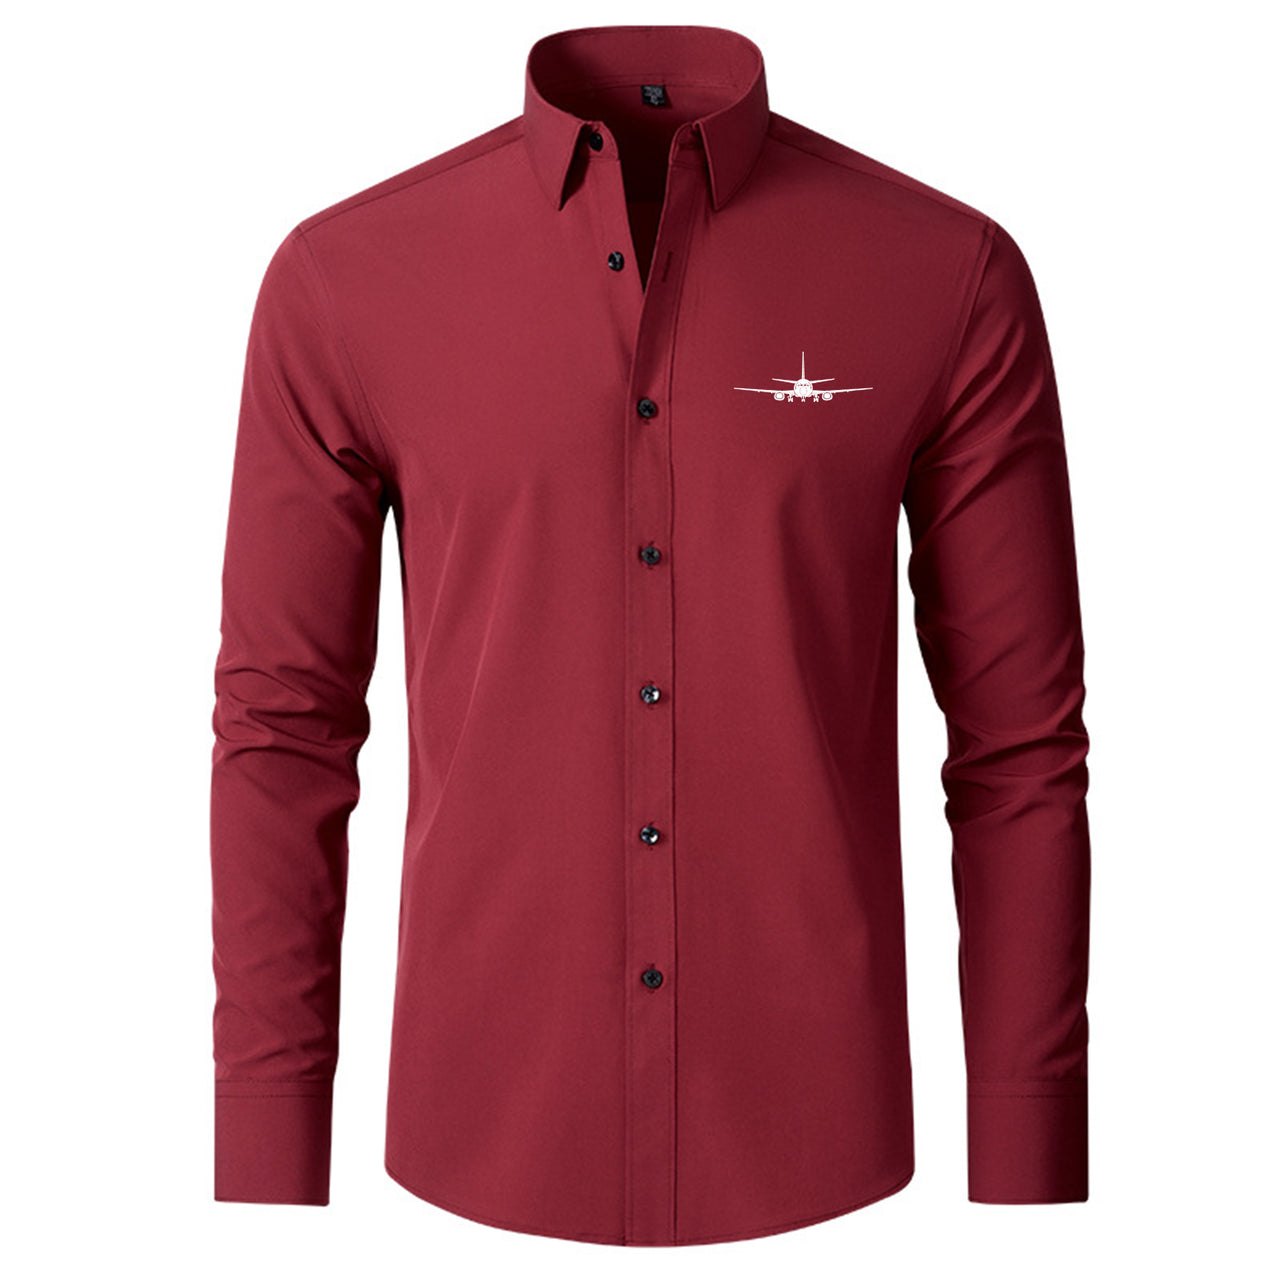 Boeing 737 Silhouette Designed Long Sleeve Shirts